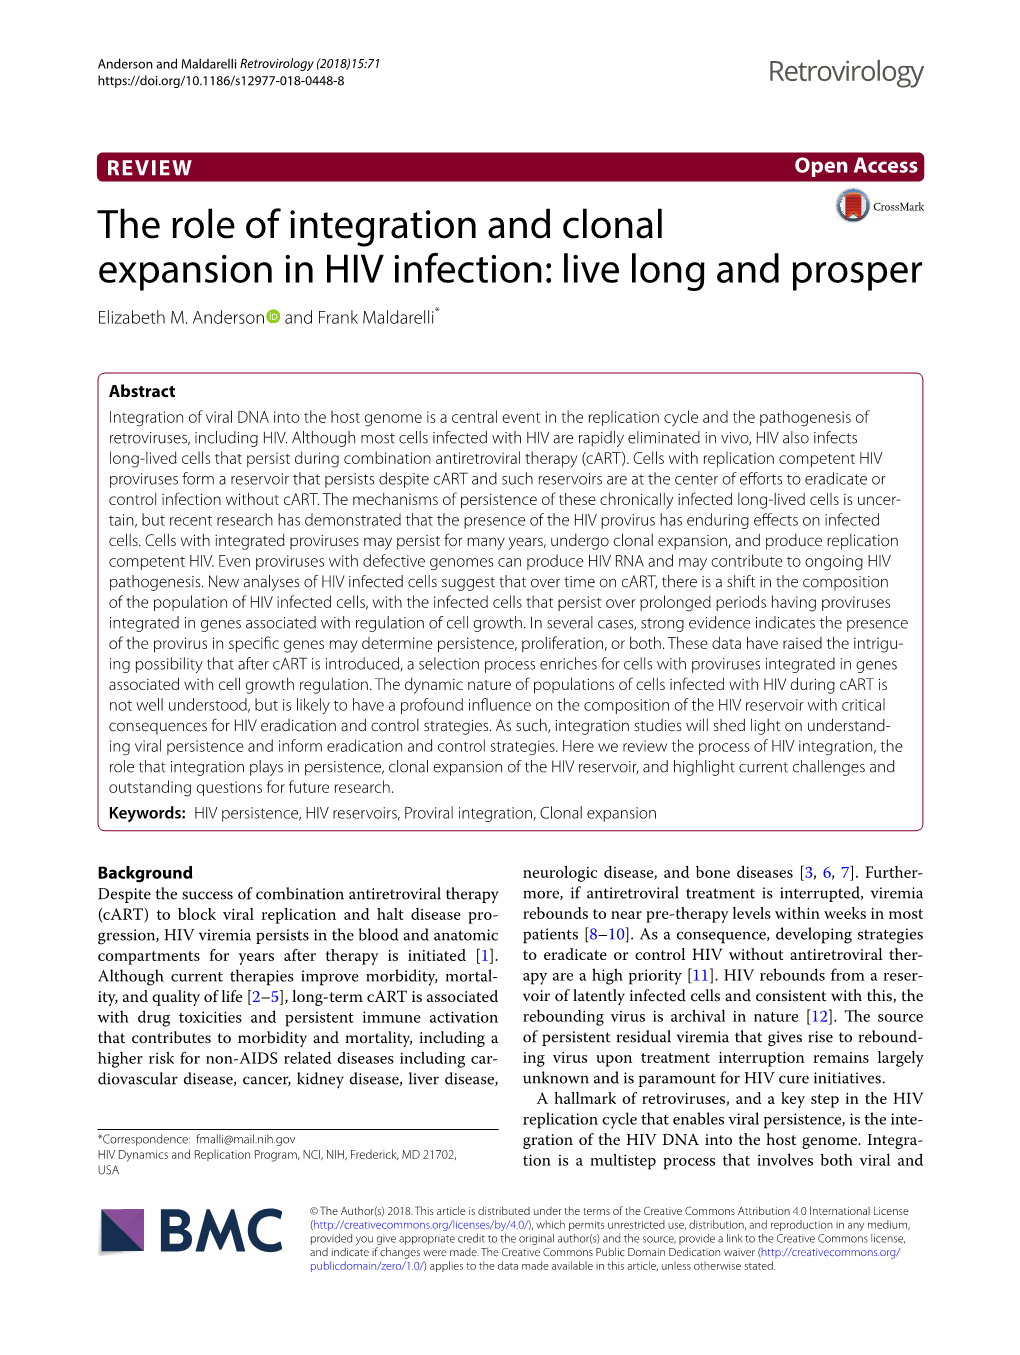 The Role of Integration and Clonal Expansion in HIV Infection: Live Long and Prosper Elizabeth M